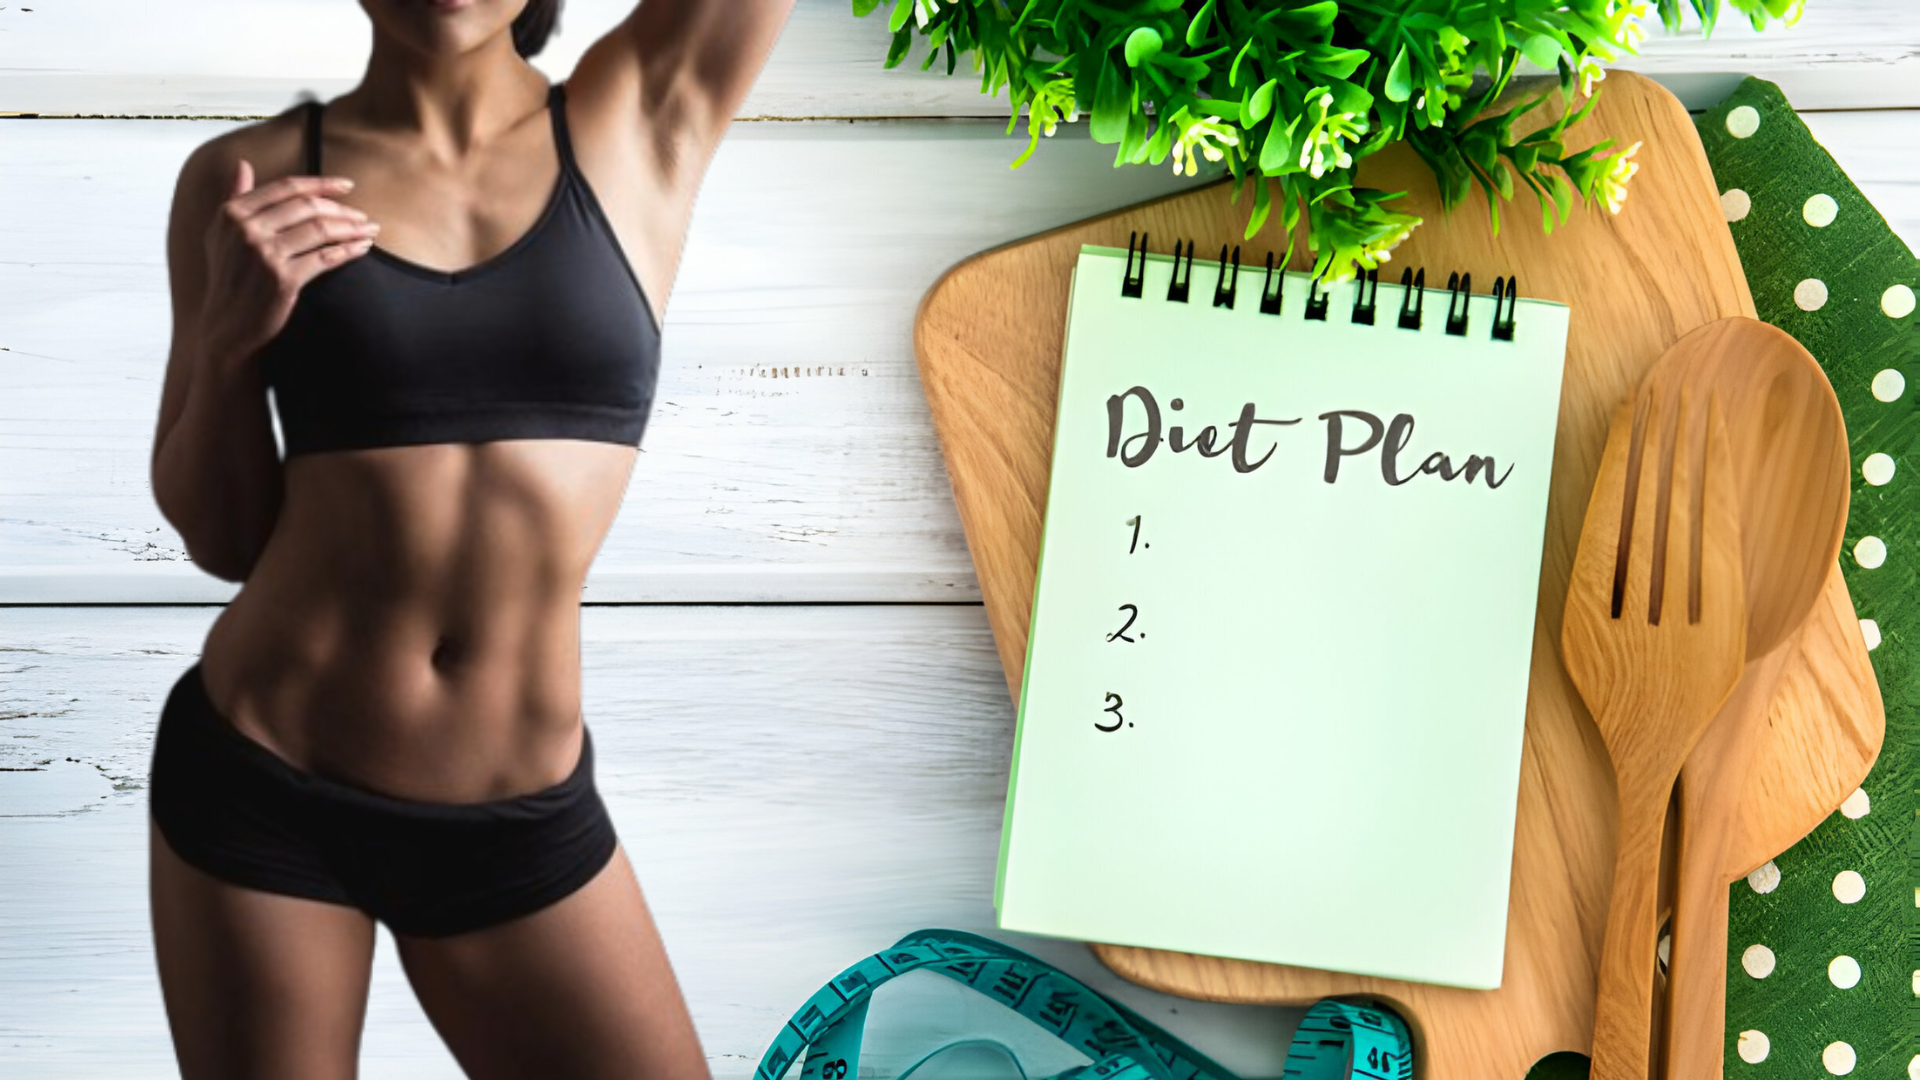 diet plan for weight loss